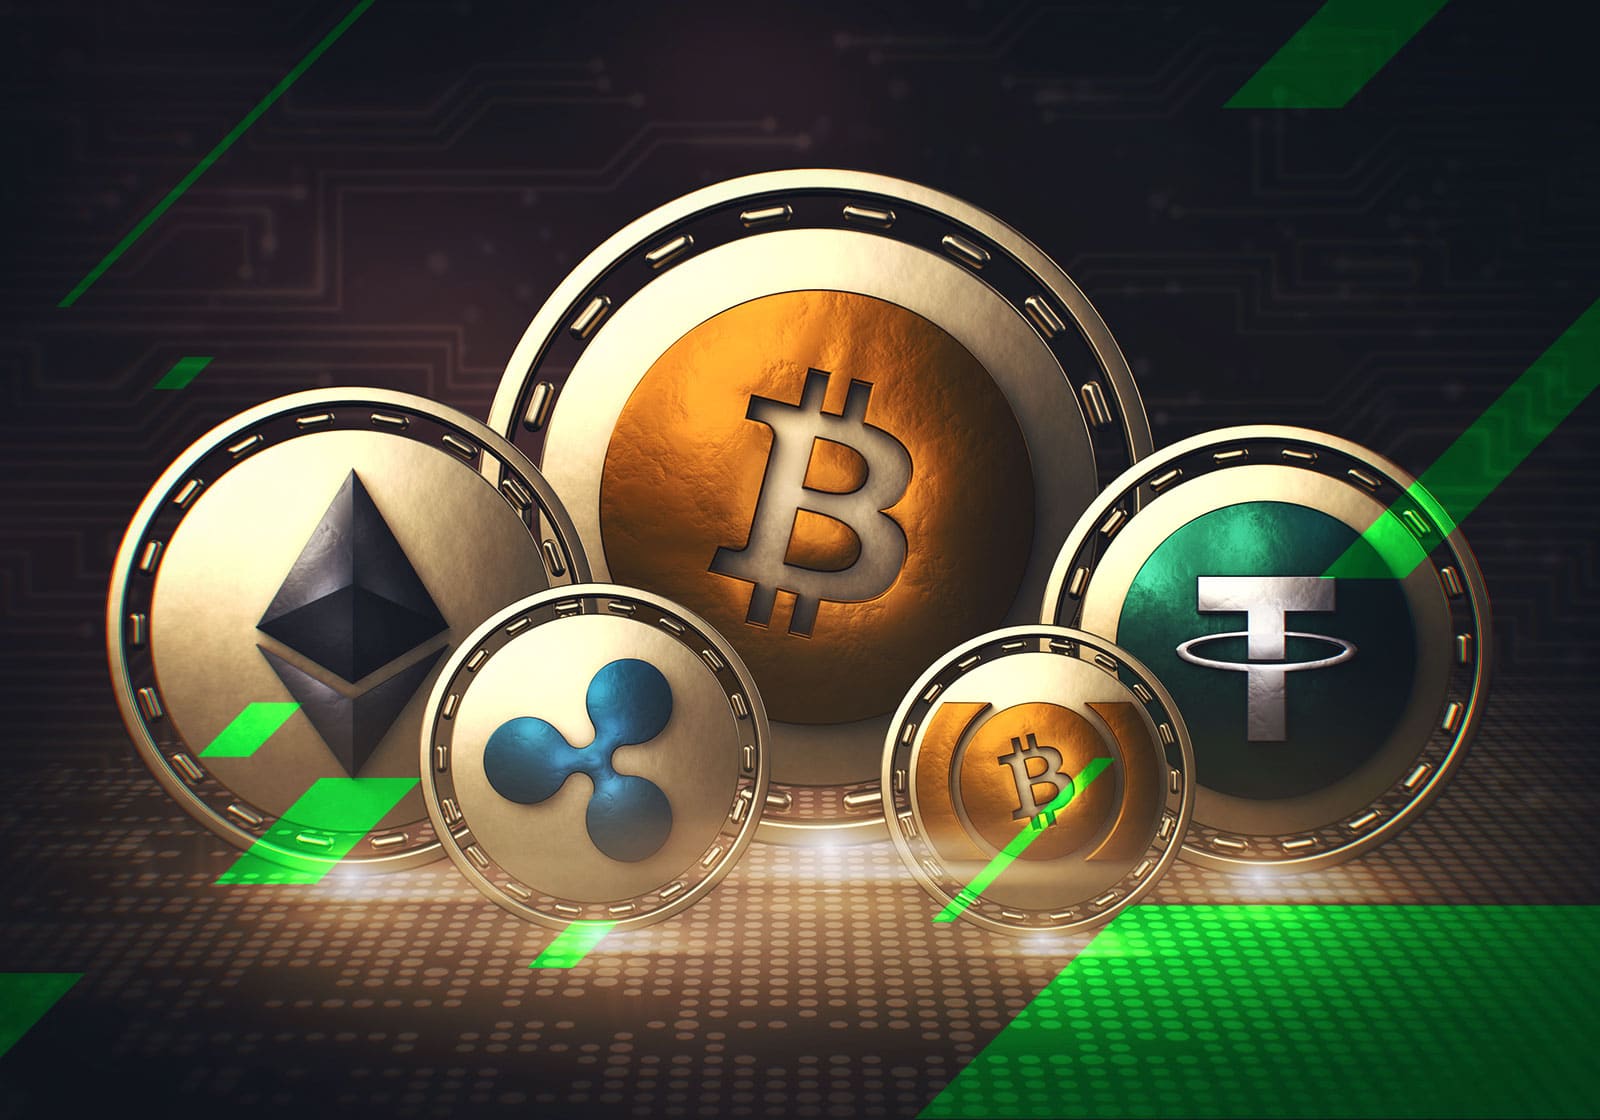 Top 5 cryptocurrencies to buy and hold in 2022